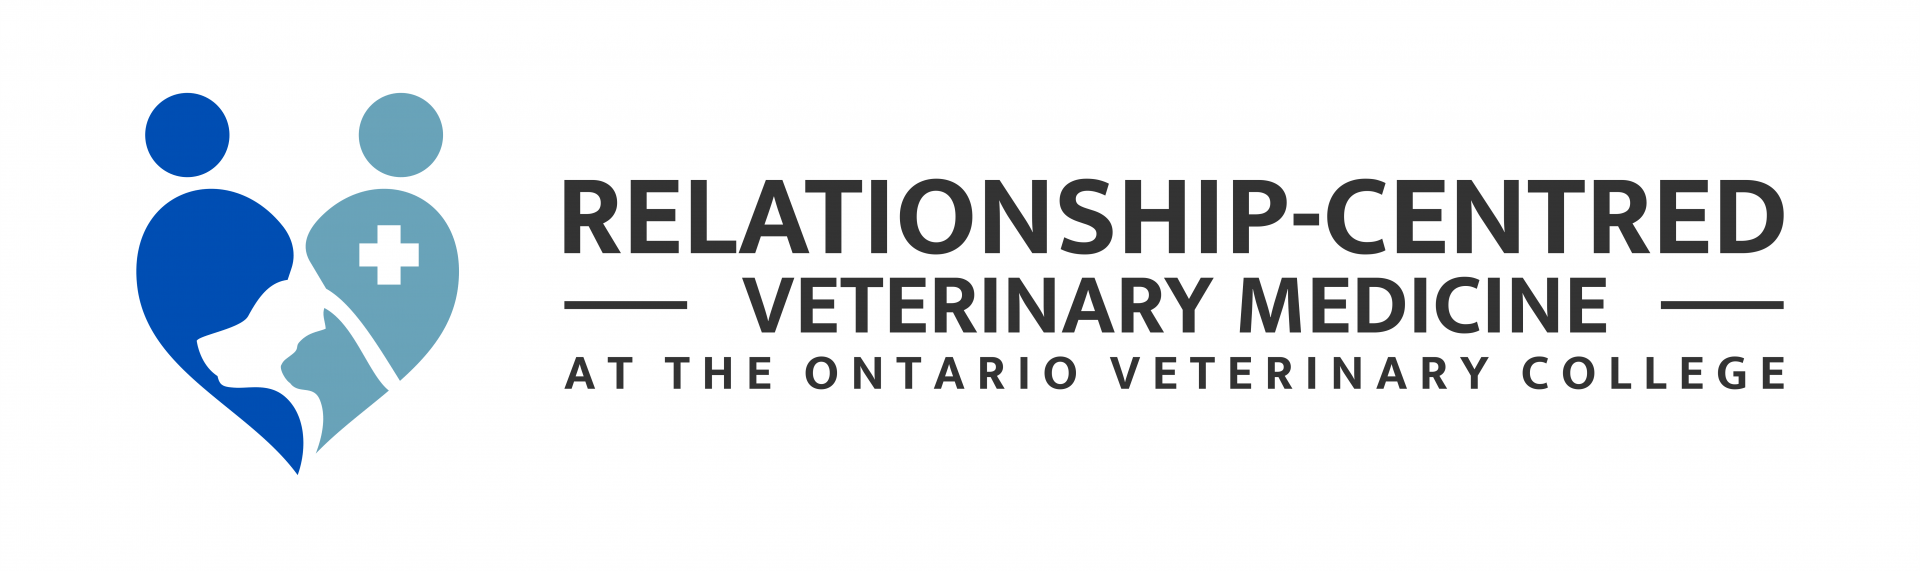 Logo of RCVM@OVC team, with an image of graphic heart on left side, where the two halves of the heart also look like two abstract people, and inside the heart are the profiles of a dog and a cat.  To the right of the image is the logo text, which says "Relationship-Centred Veterinary Medicine at the Ontario Veterinary College".